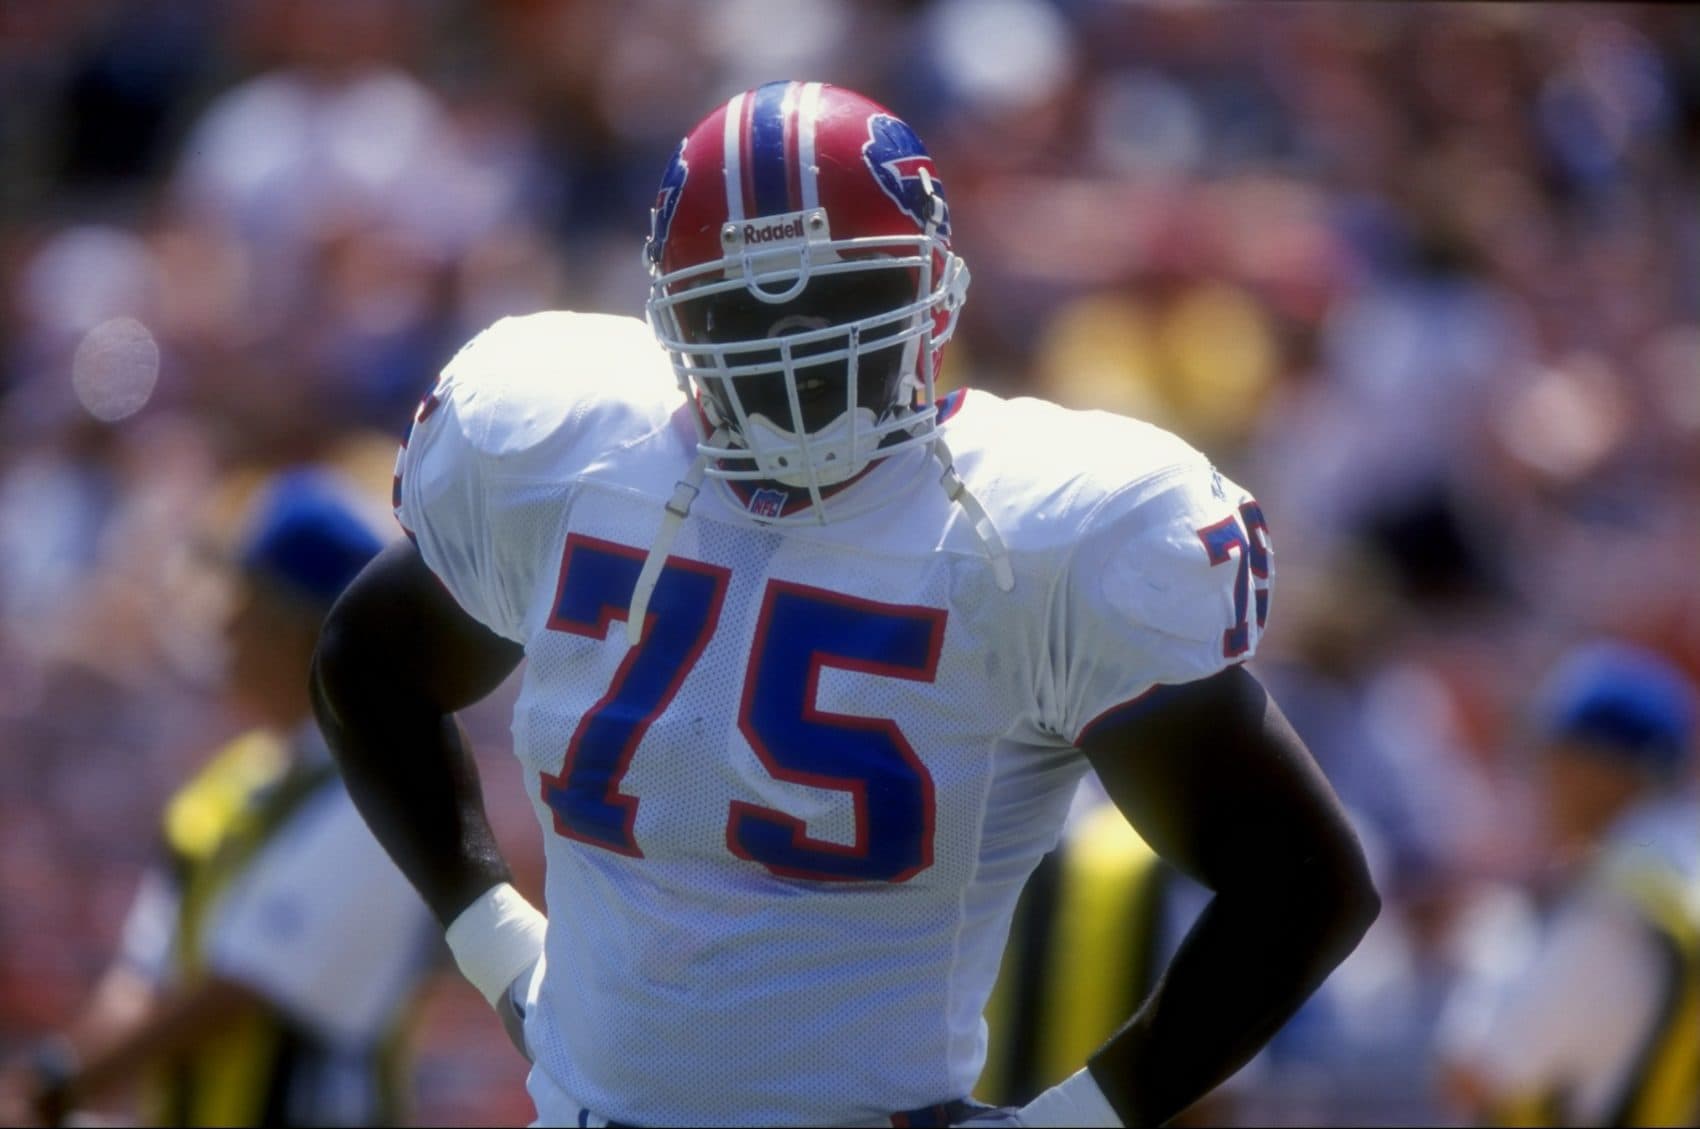 Wiley playing with the Buffalo Bills in 1998 (Getty Images/Todd Warshaw)